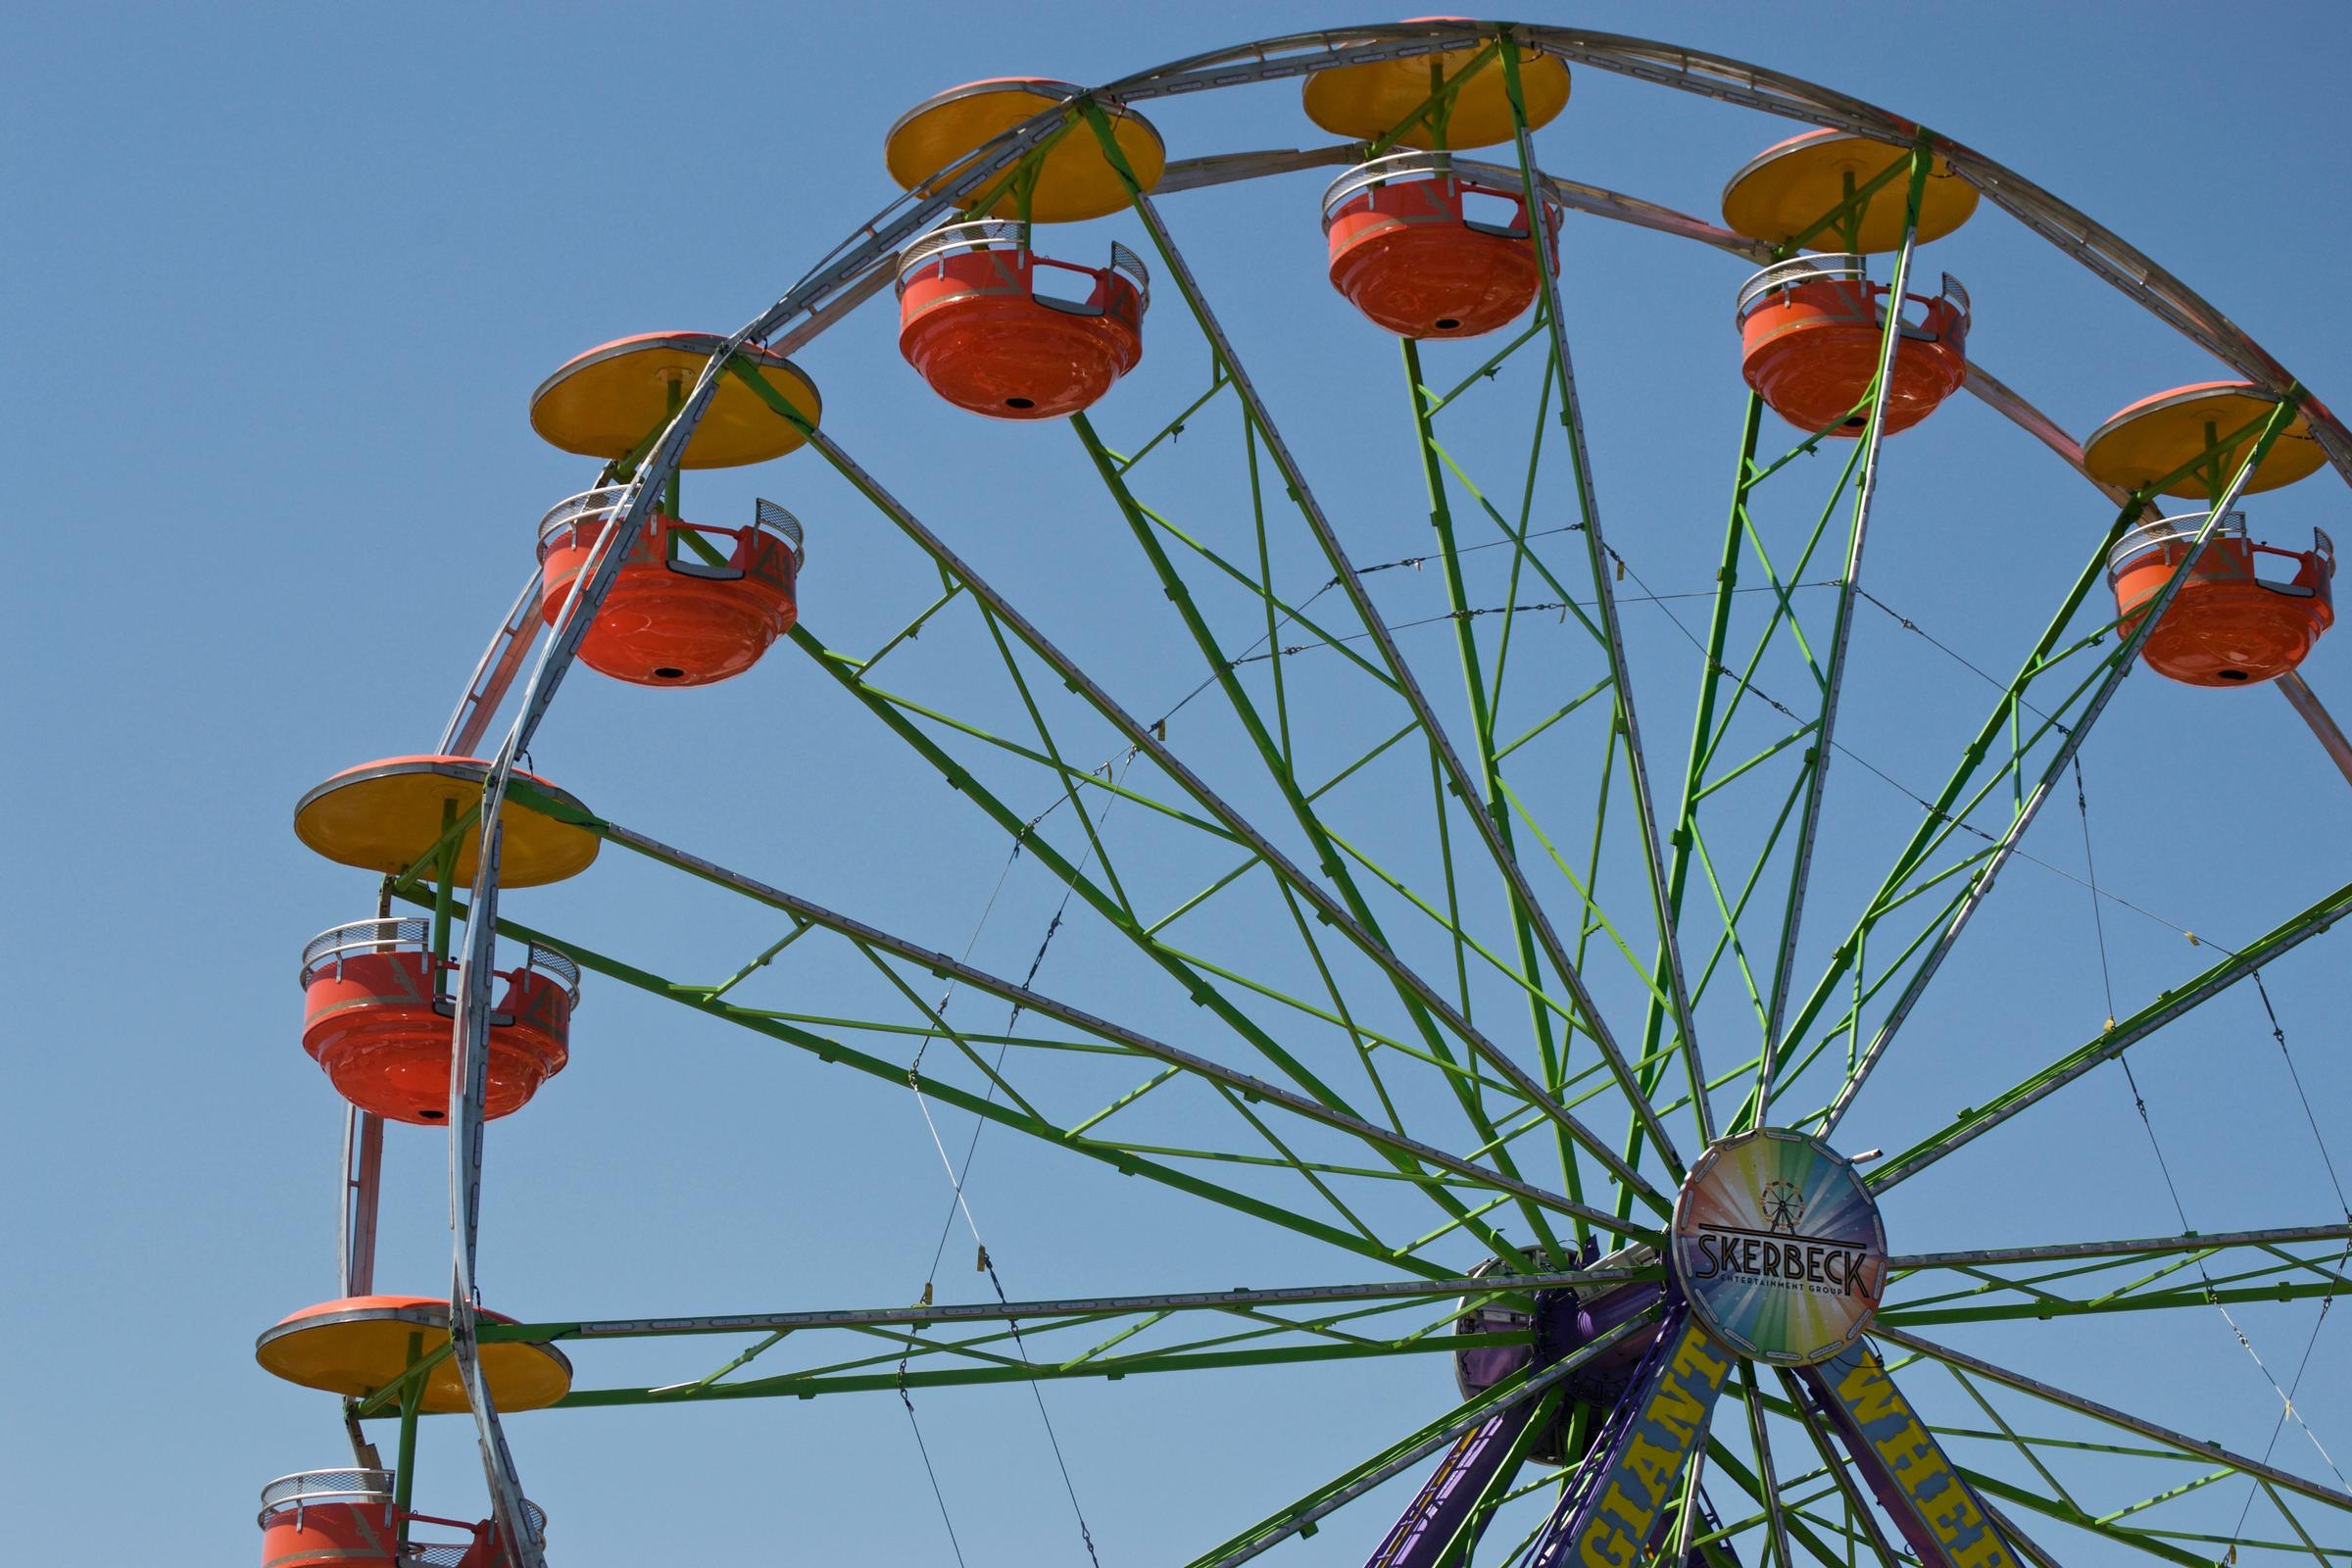 Ferris Wheels, Goats, And Candy Apples At The Ingham County Fair | WKAR